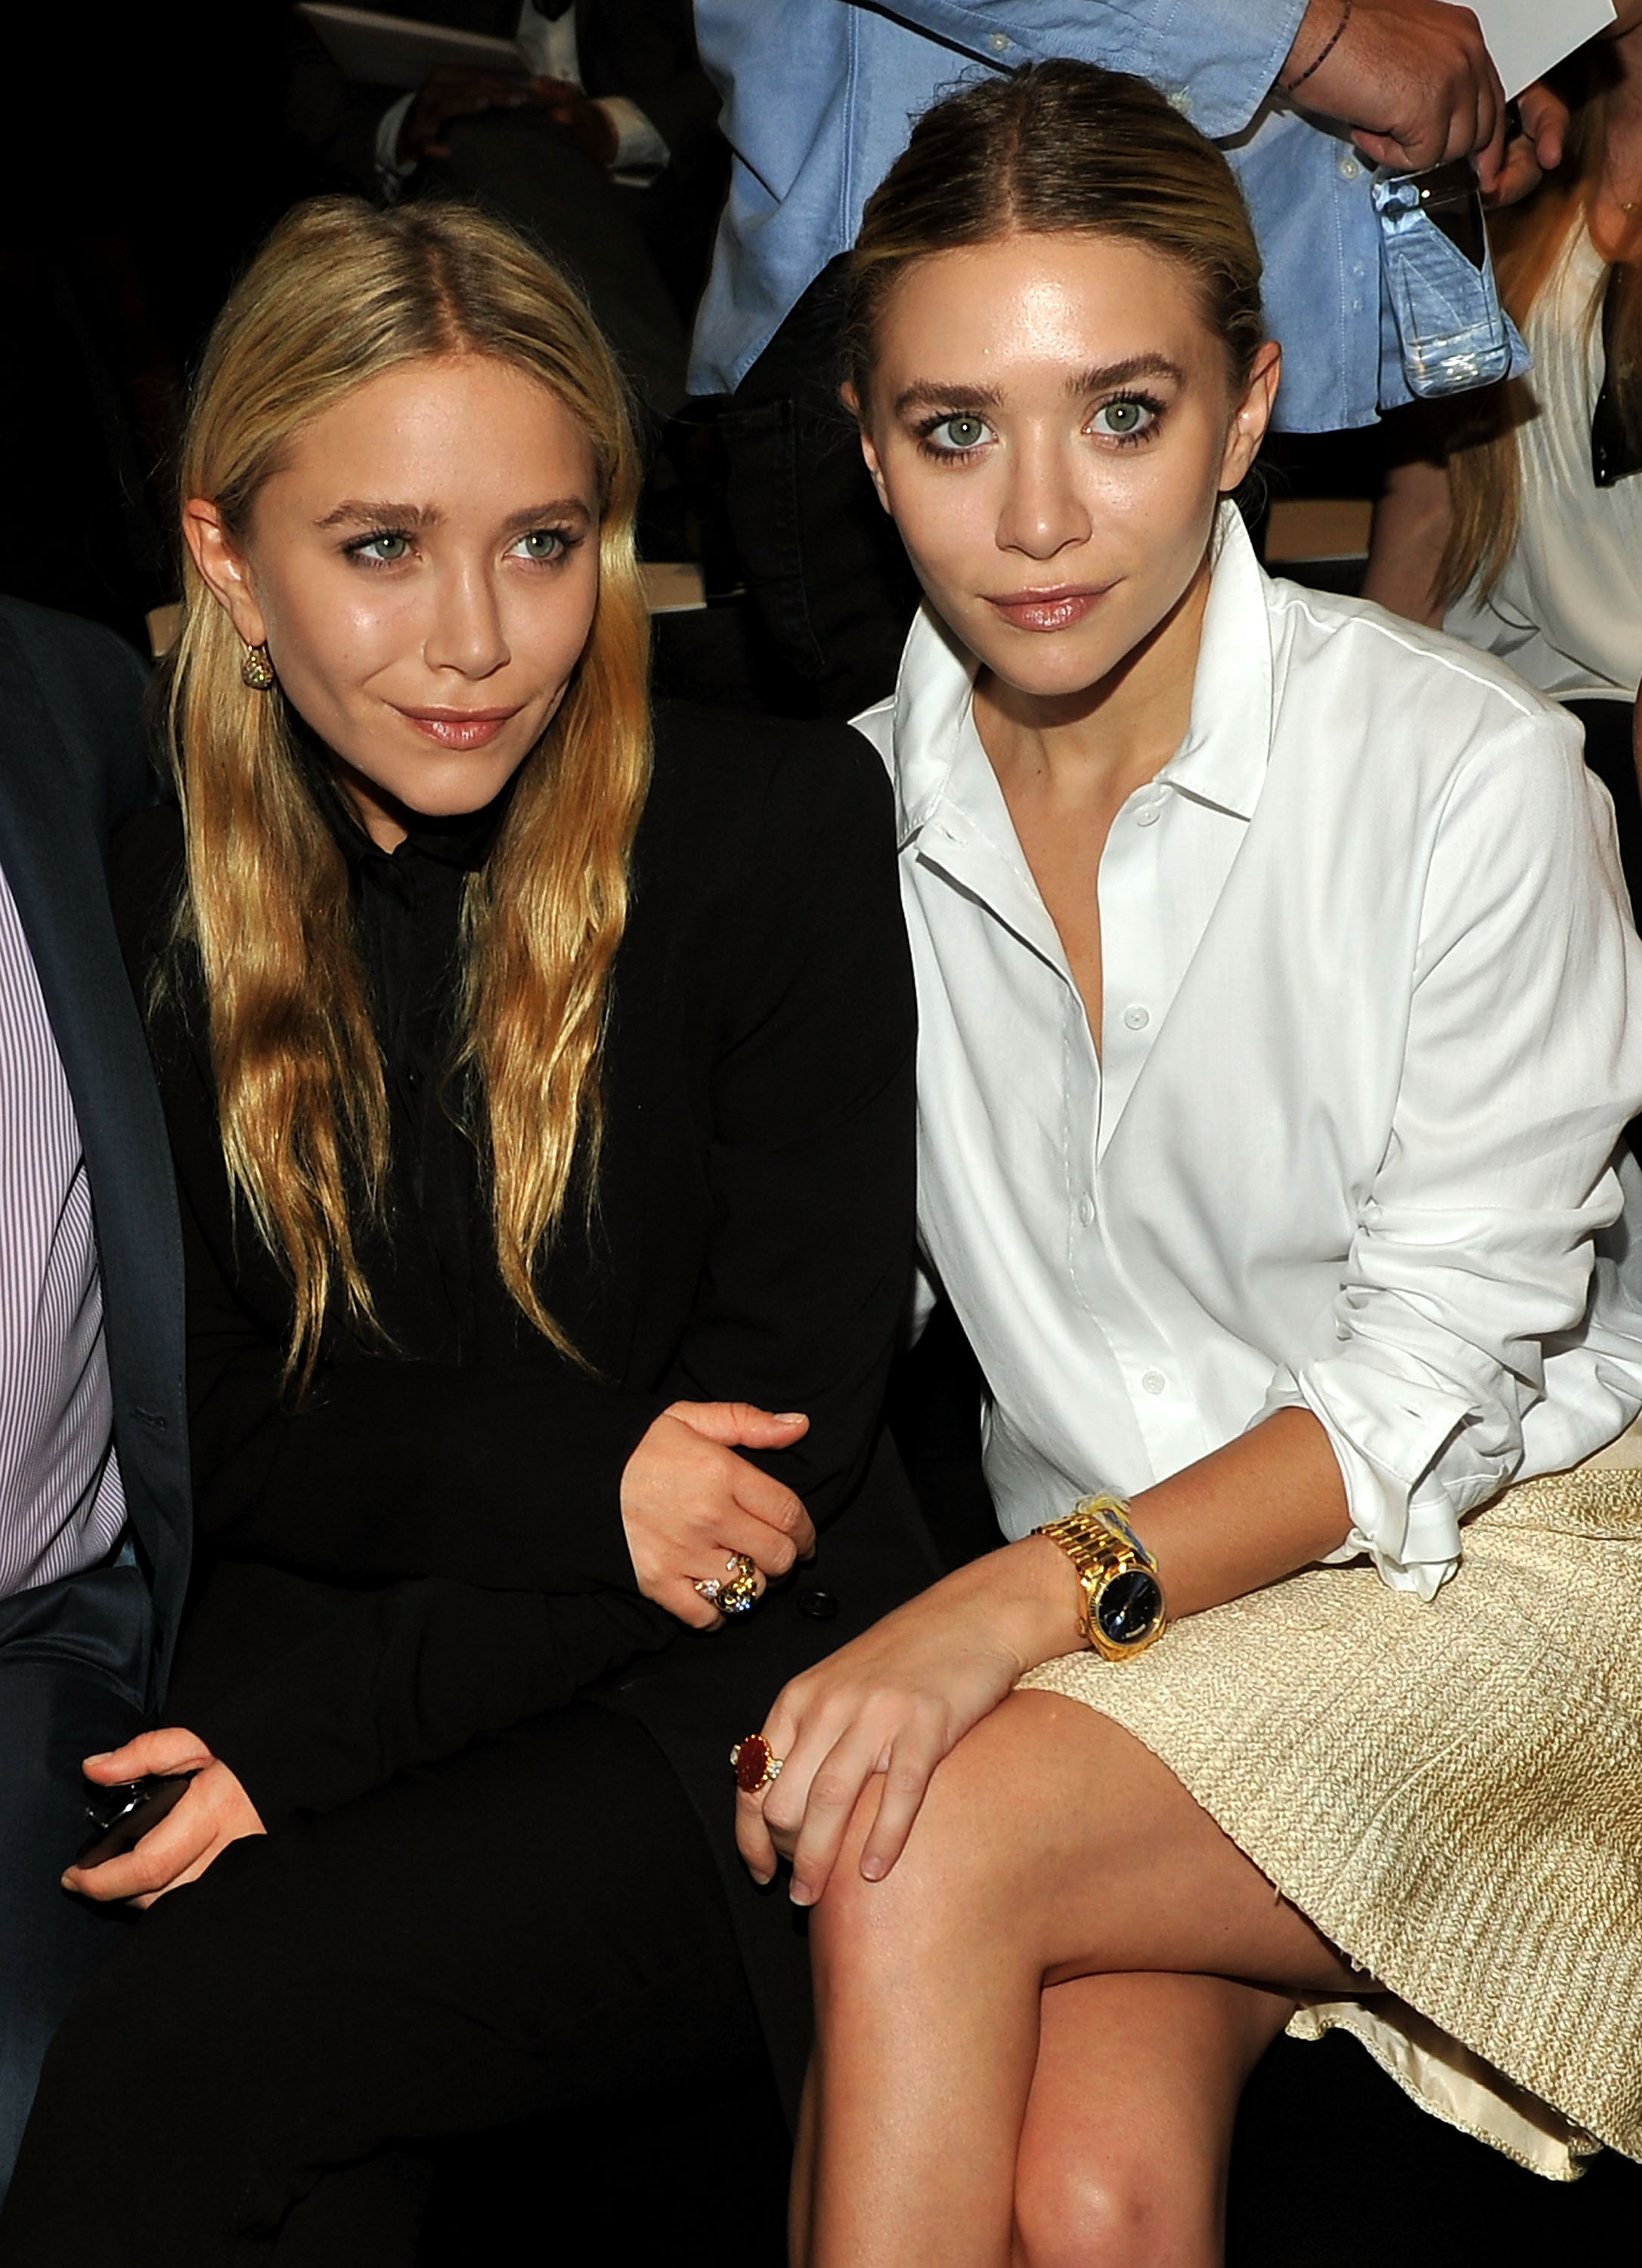 Mary-Kate and Ashley Olsen at the J.Mendel Spring 2012 Fashion Show on September 14, 2011, in New York City. | Source: Getty Images